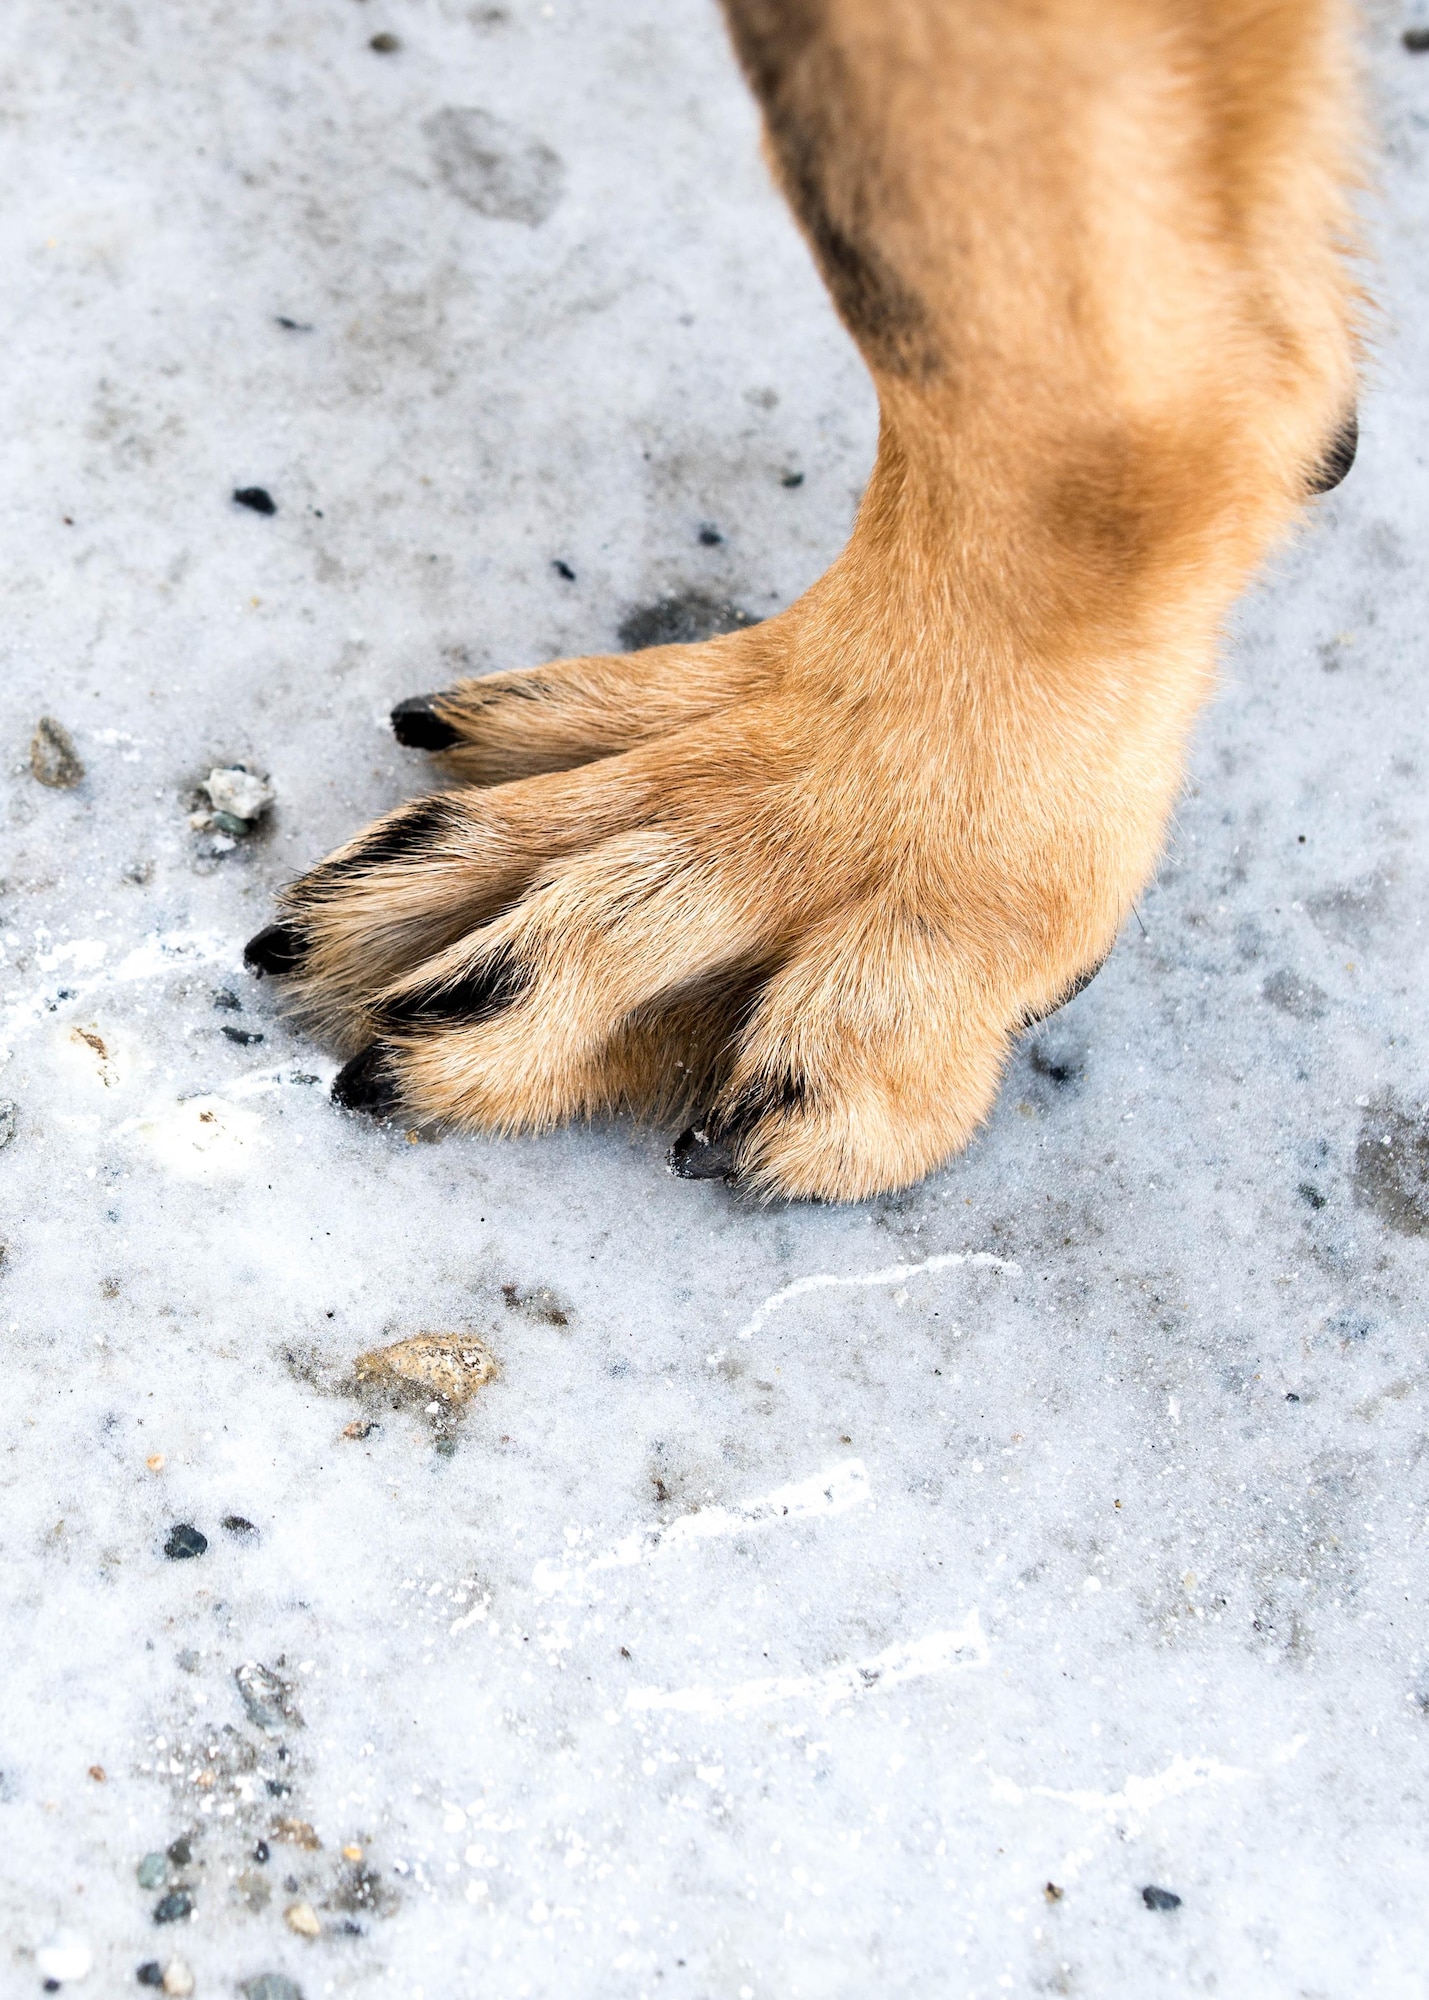 Cage, a 354th Security Forces Squadron military working dog, digs his claws into the ice pack in a parking lot March 7, 2016, while conducting a parking lot sweep at Eielson Air Force Base, Alaska. Cage is paired with Staff Sgt. Barret Chappelle to protect the base and train to deploy to any environment around the world in support of Department of Defense missions and interests. (U.S. Air Force photo by Staff Sgt. Shawn Nickel/Released)